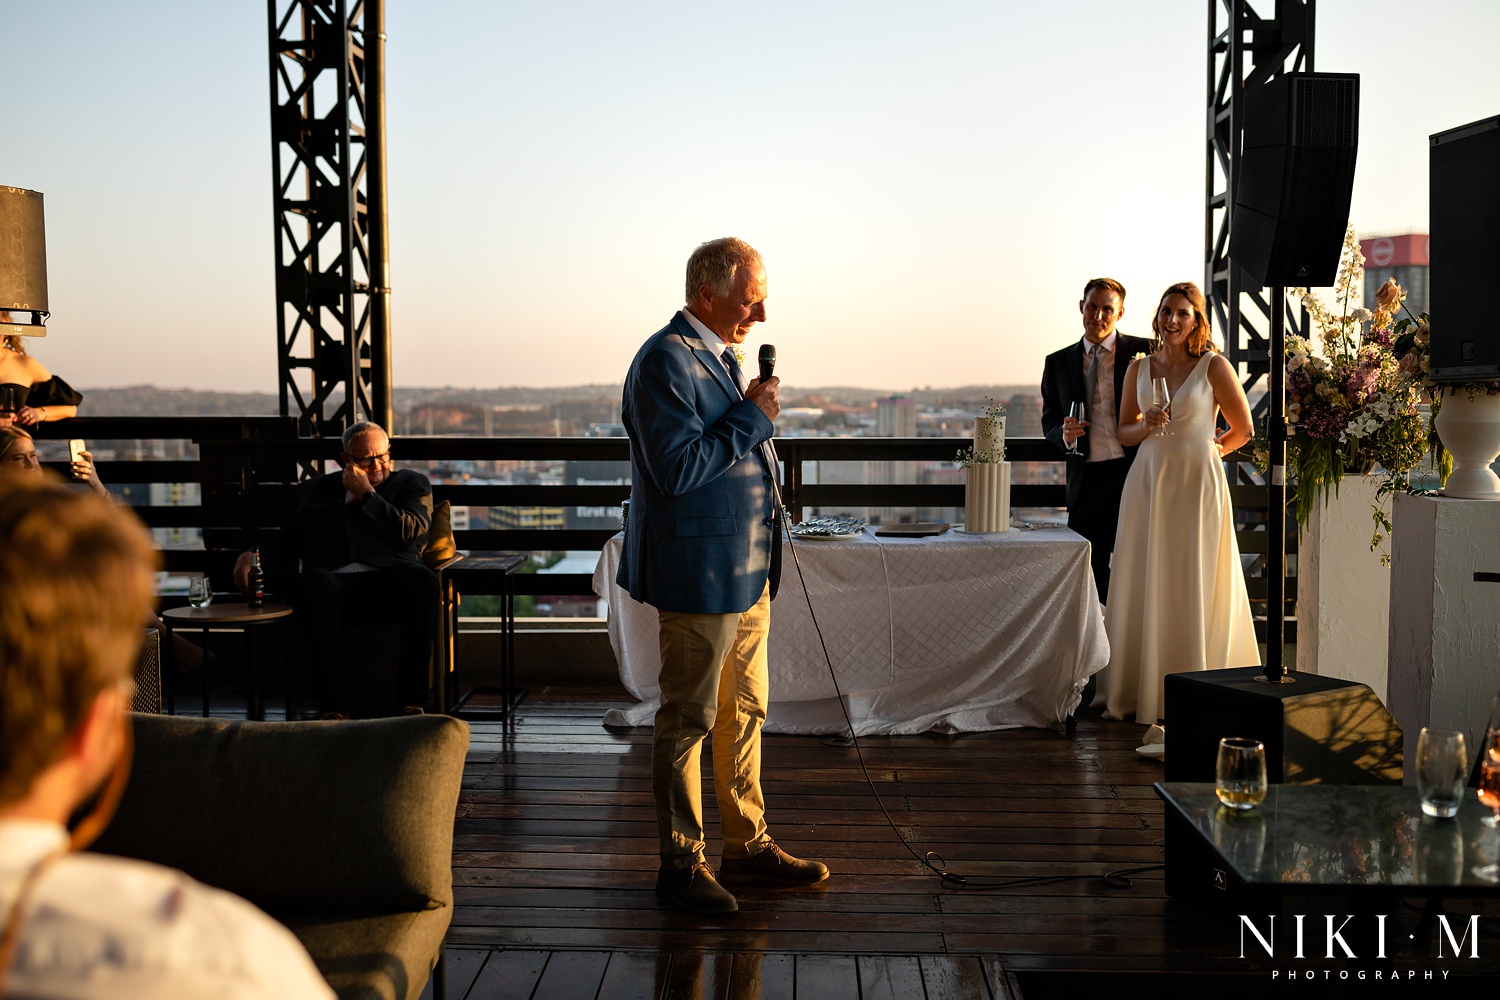 Speeches cutting overlooking the inner city skyline at a Johannesburg wedding during sunset